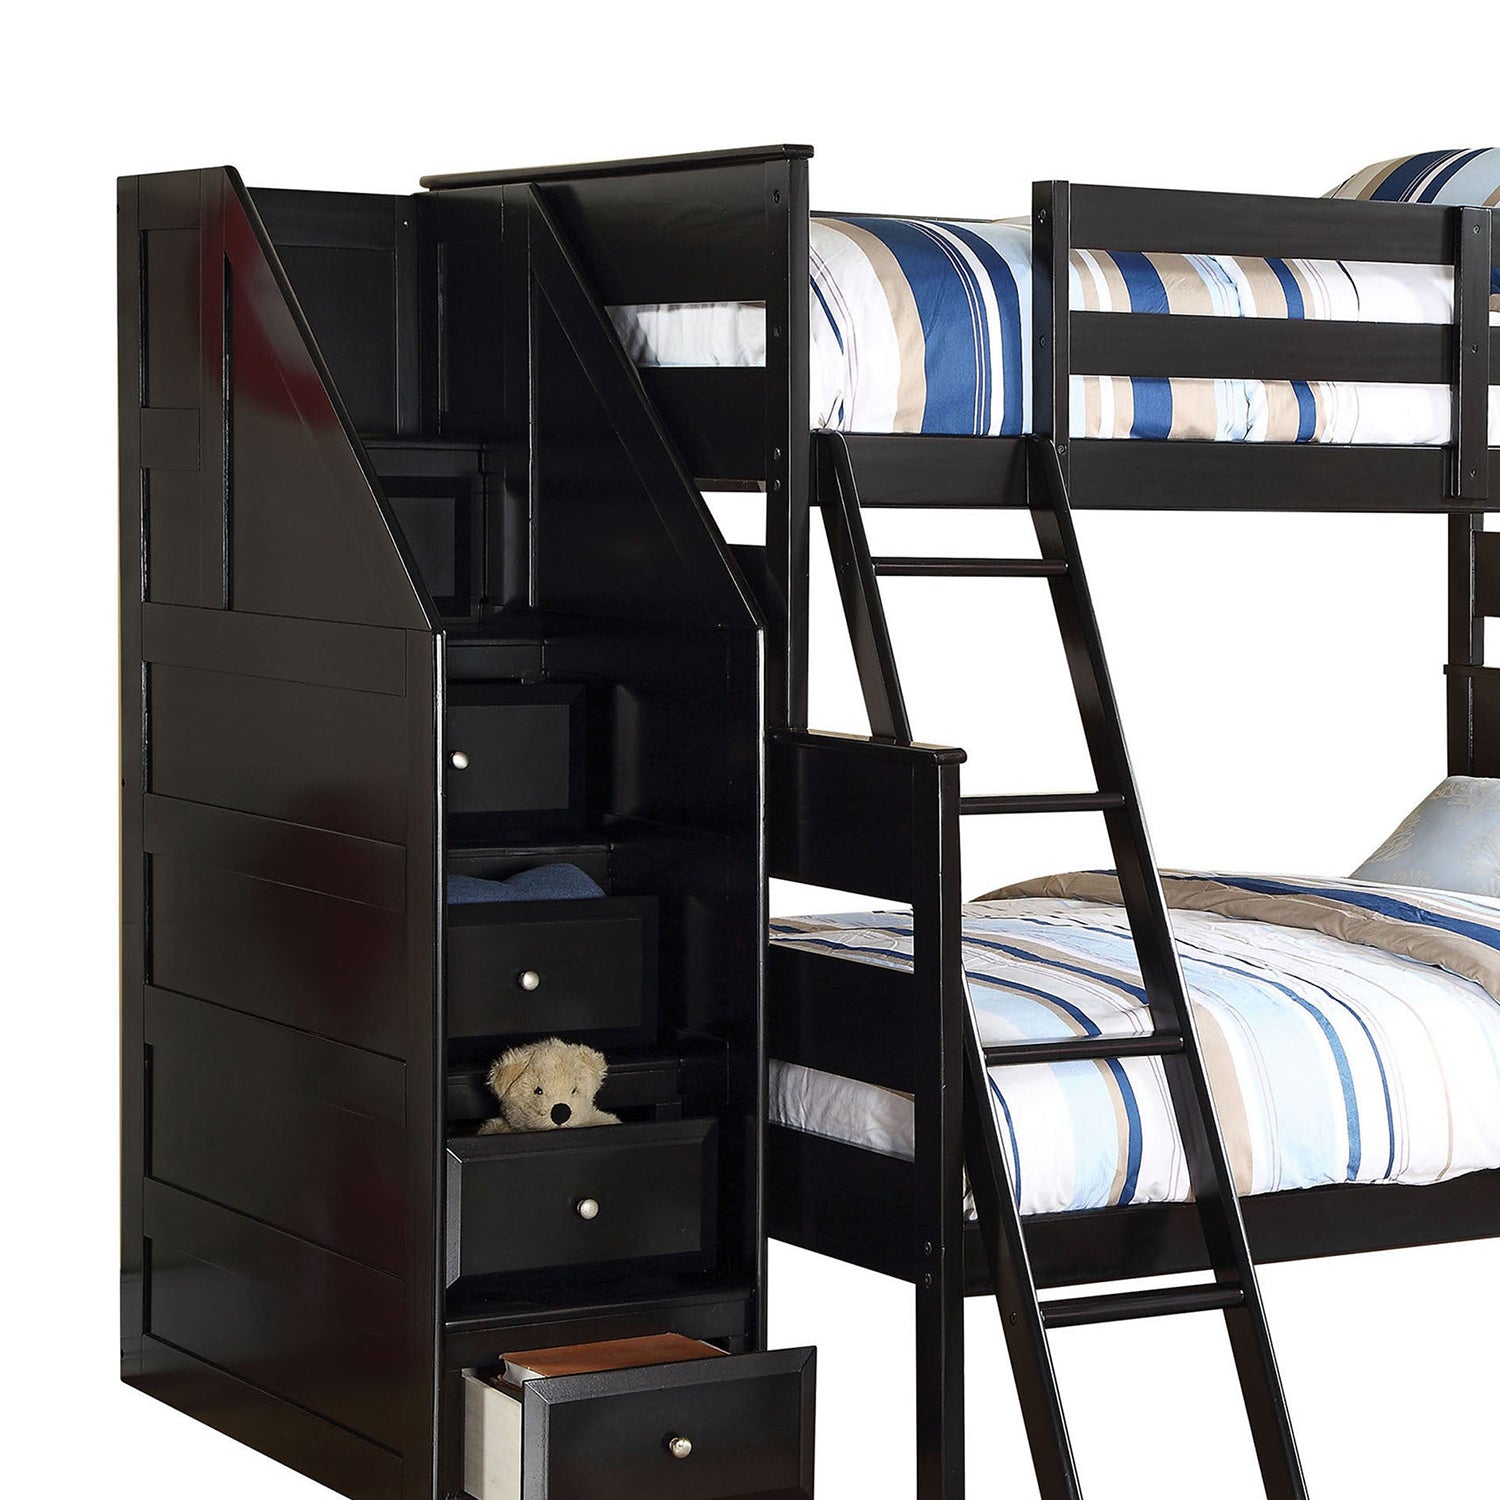 81" X 58" X 68" Black Twin Over Full Bunk Bed with Storage Ladder Default Title